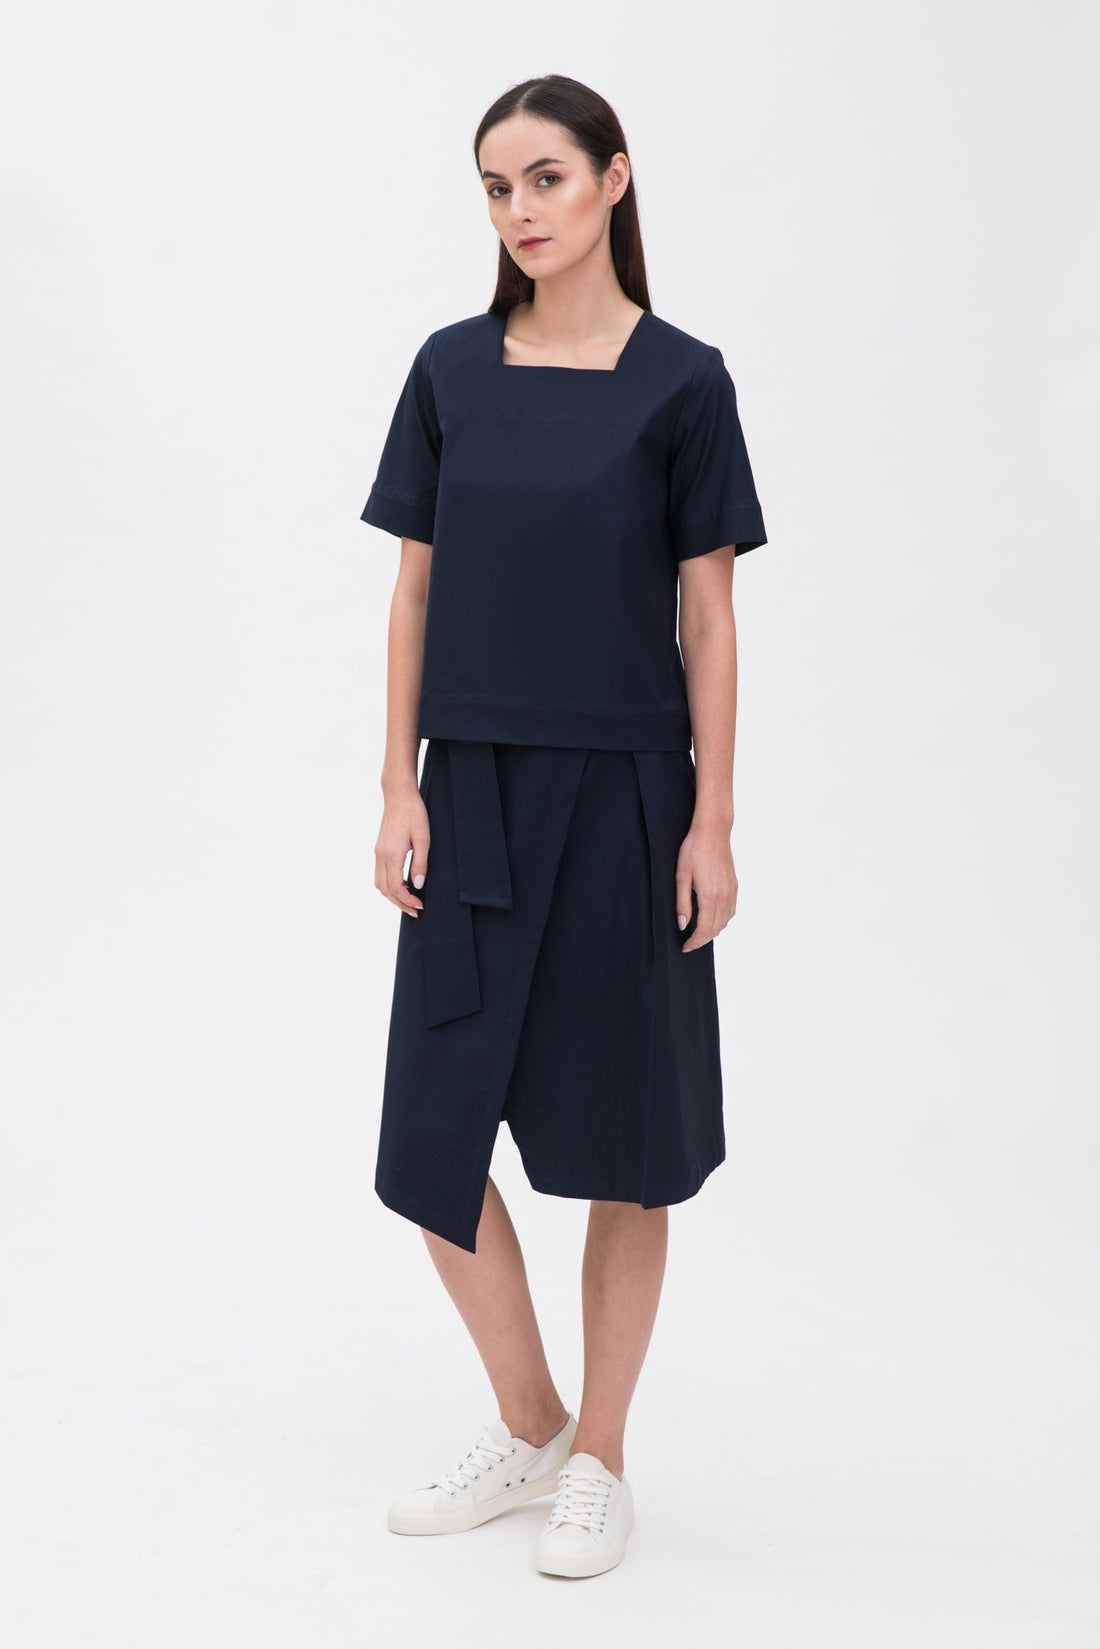 A woman with long dark hair is wearing a navy t-shirt and asymmetric navy skirt  with white shoes